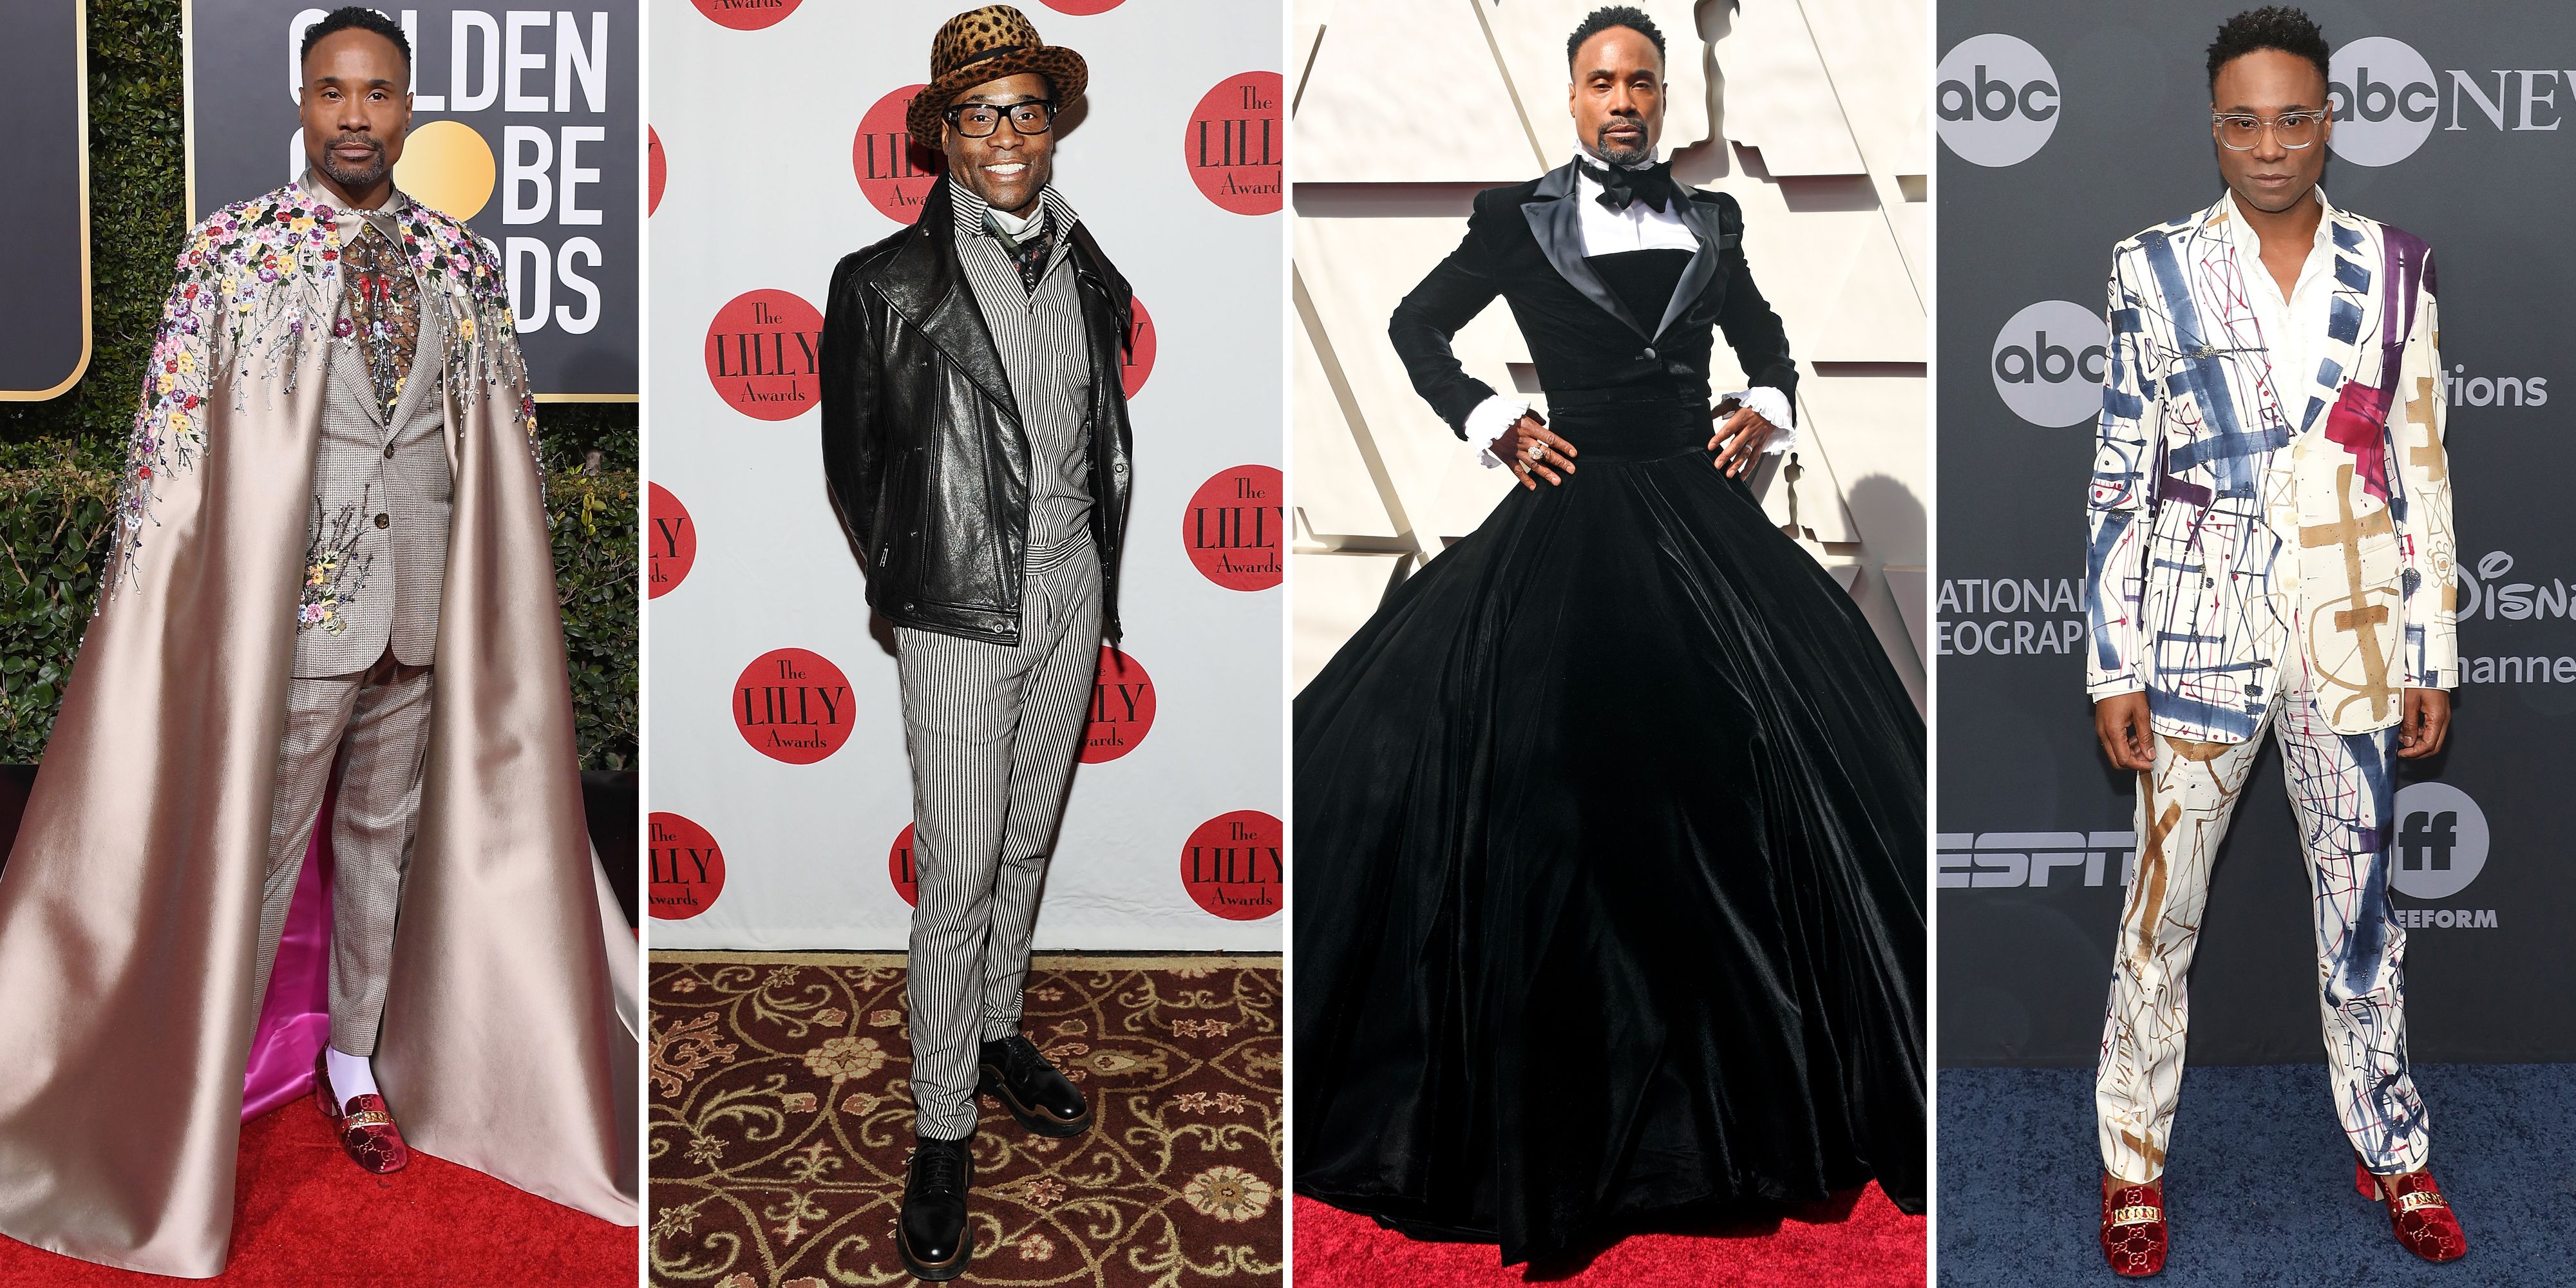 Billy Porter's Best Red Carpet Fashion, Beauty Moments